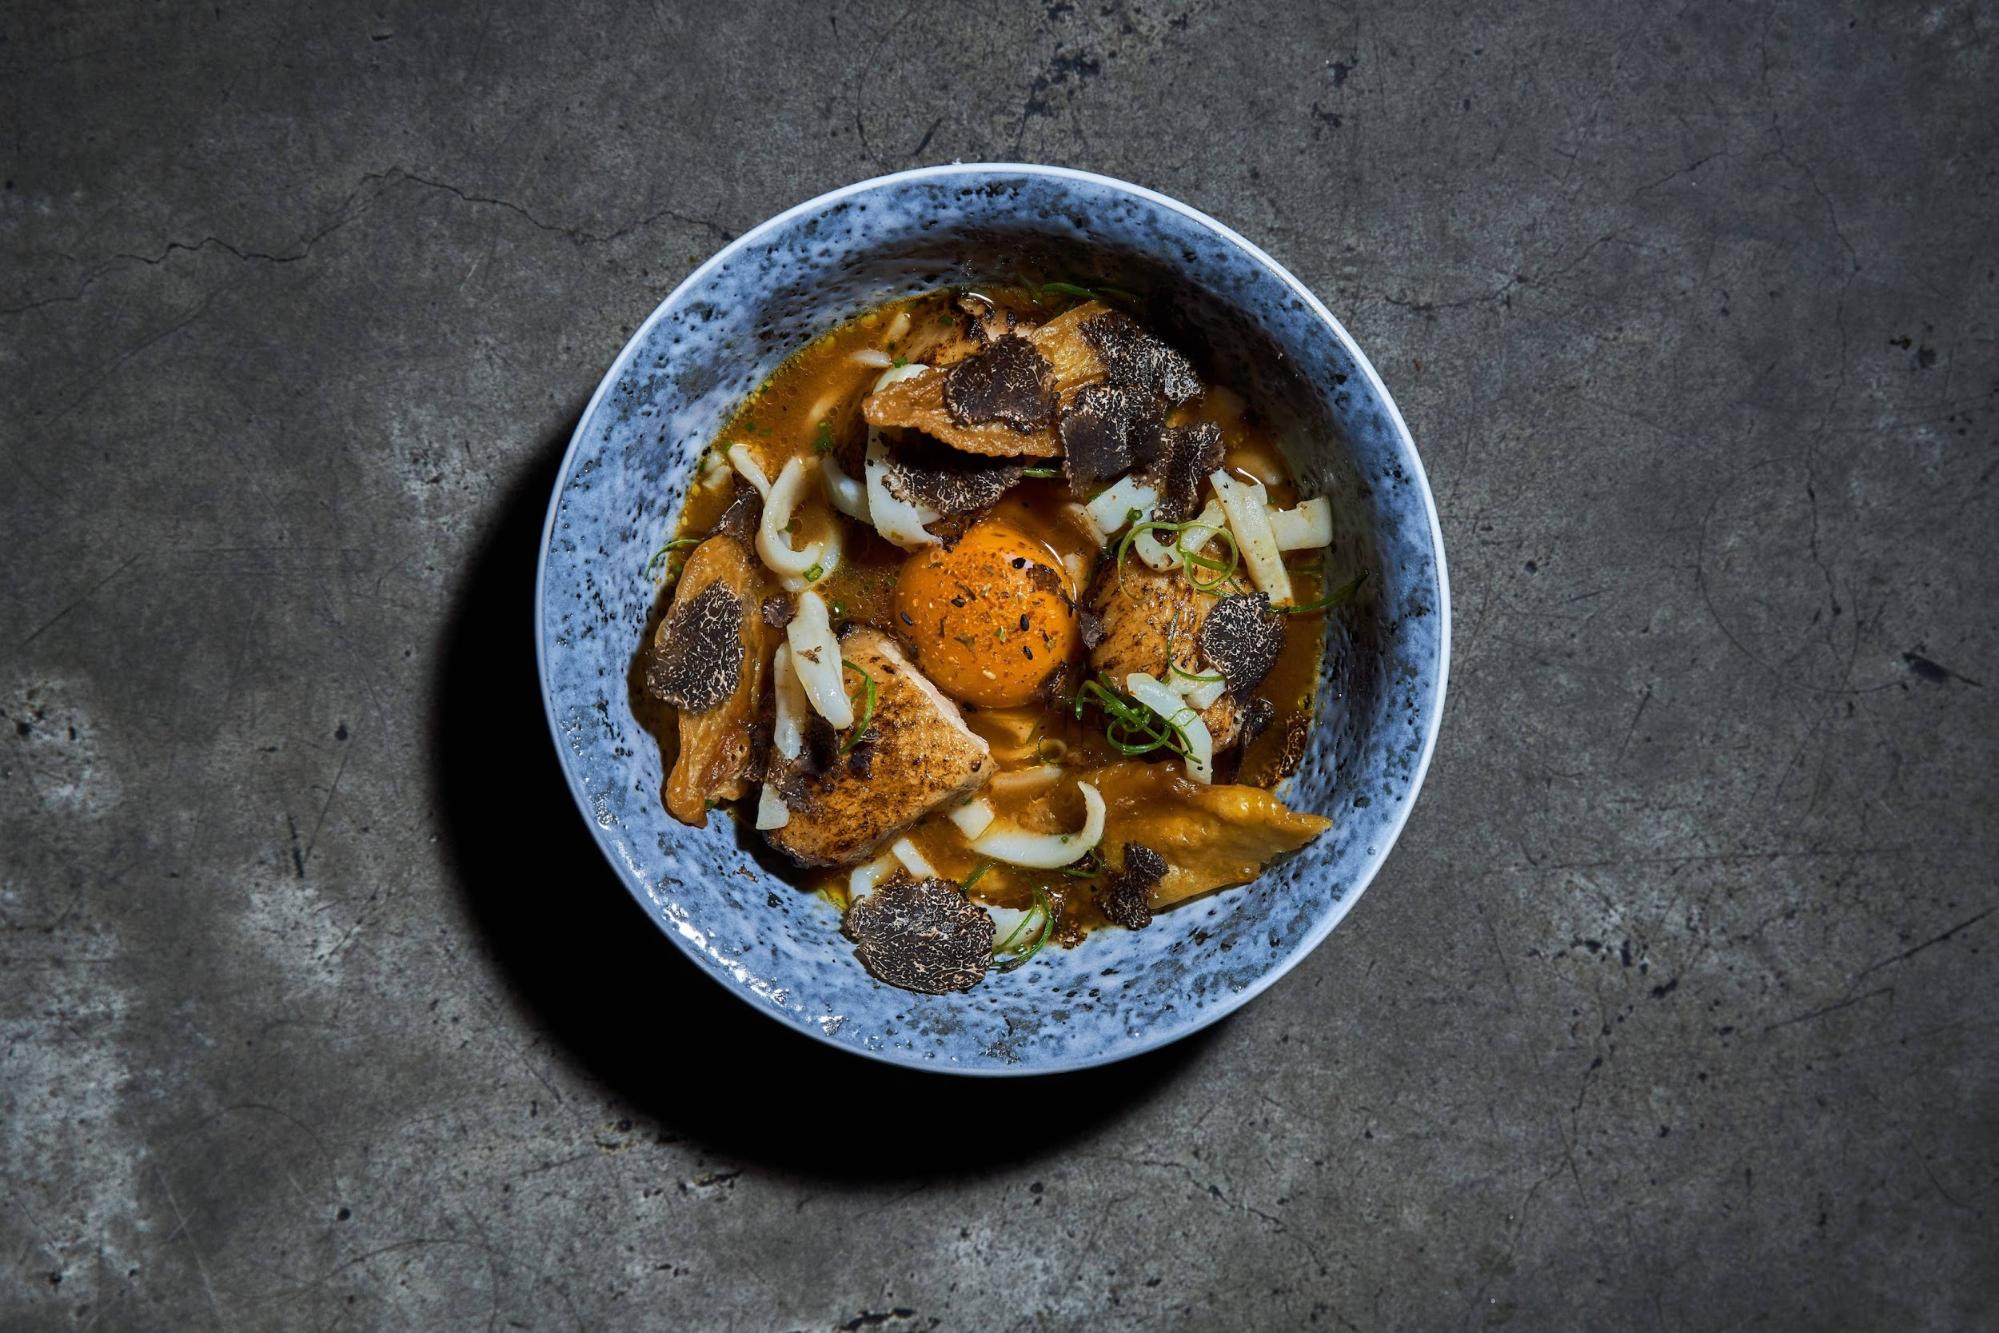 Squid Noodle and Chicken Wing Ramen, Egg Yolk, Chicken and Truffle Broth